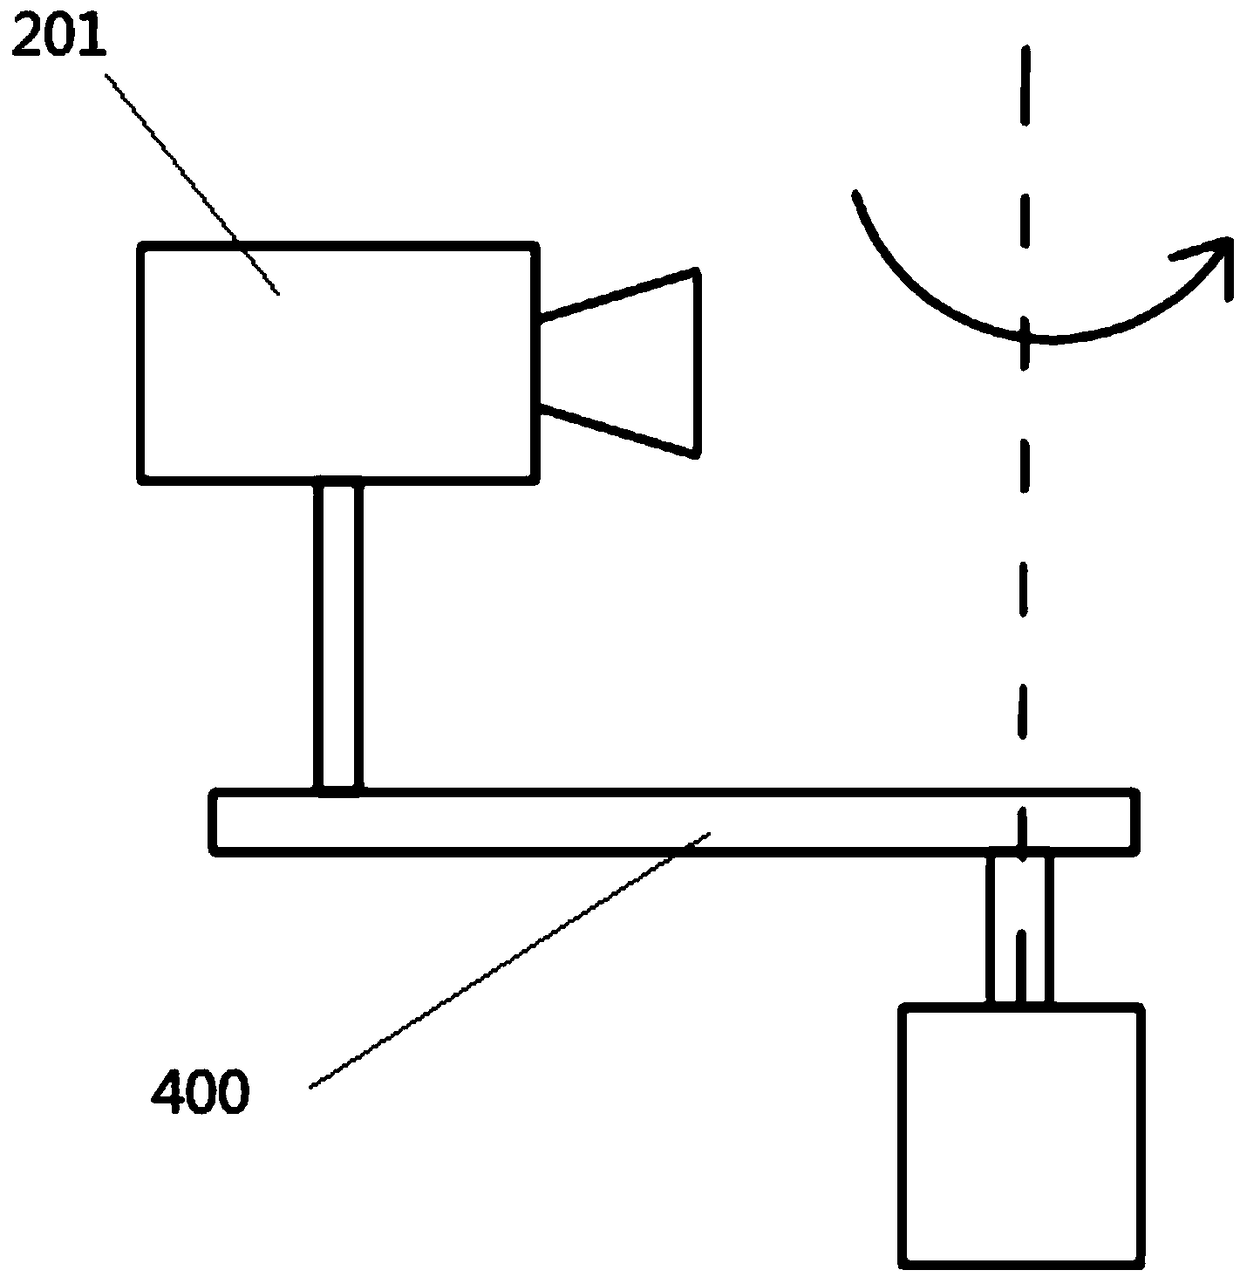 A 3D measurement and acquisition device based on a virtual matrix